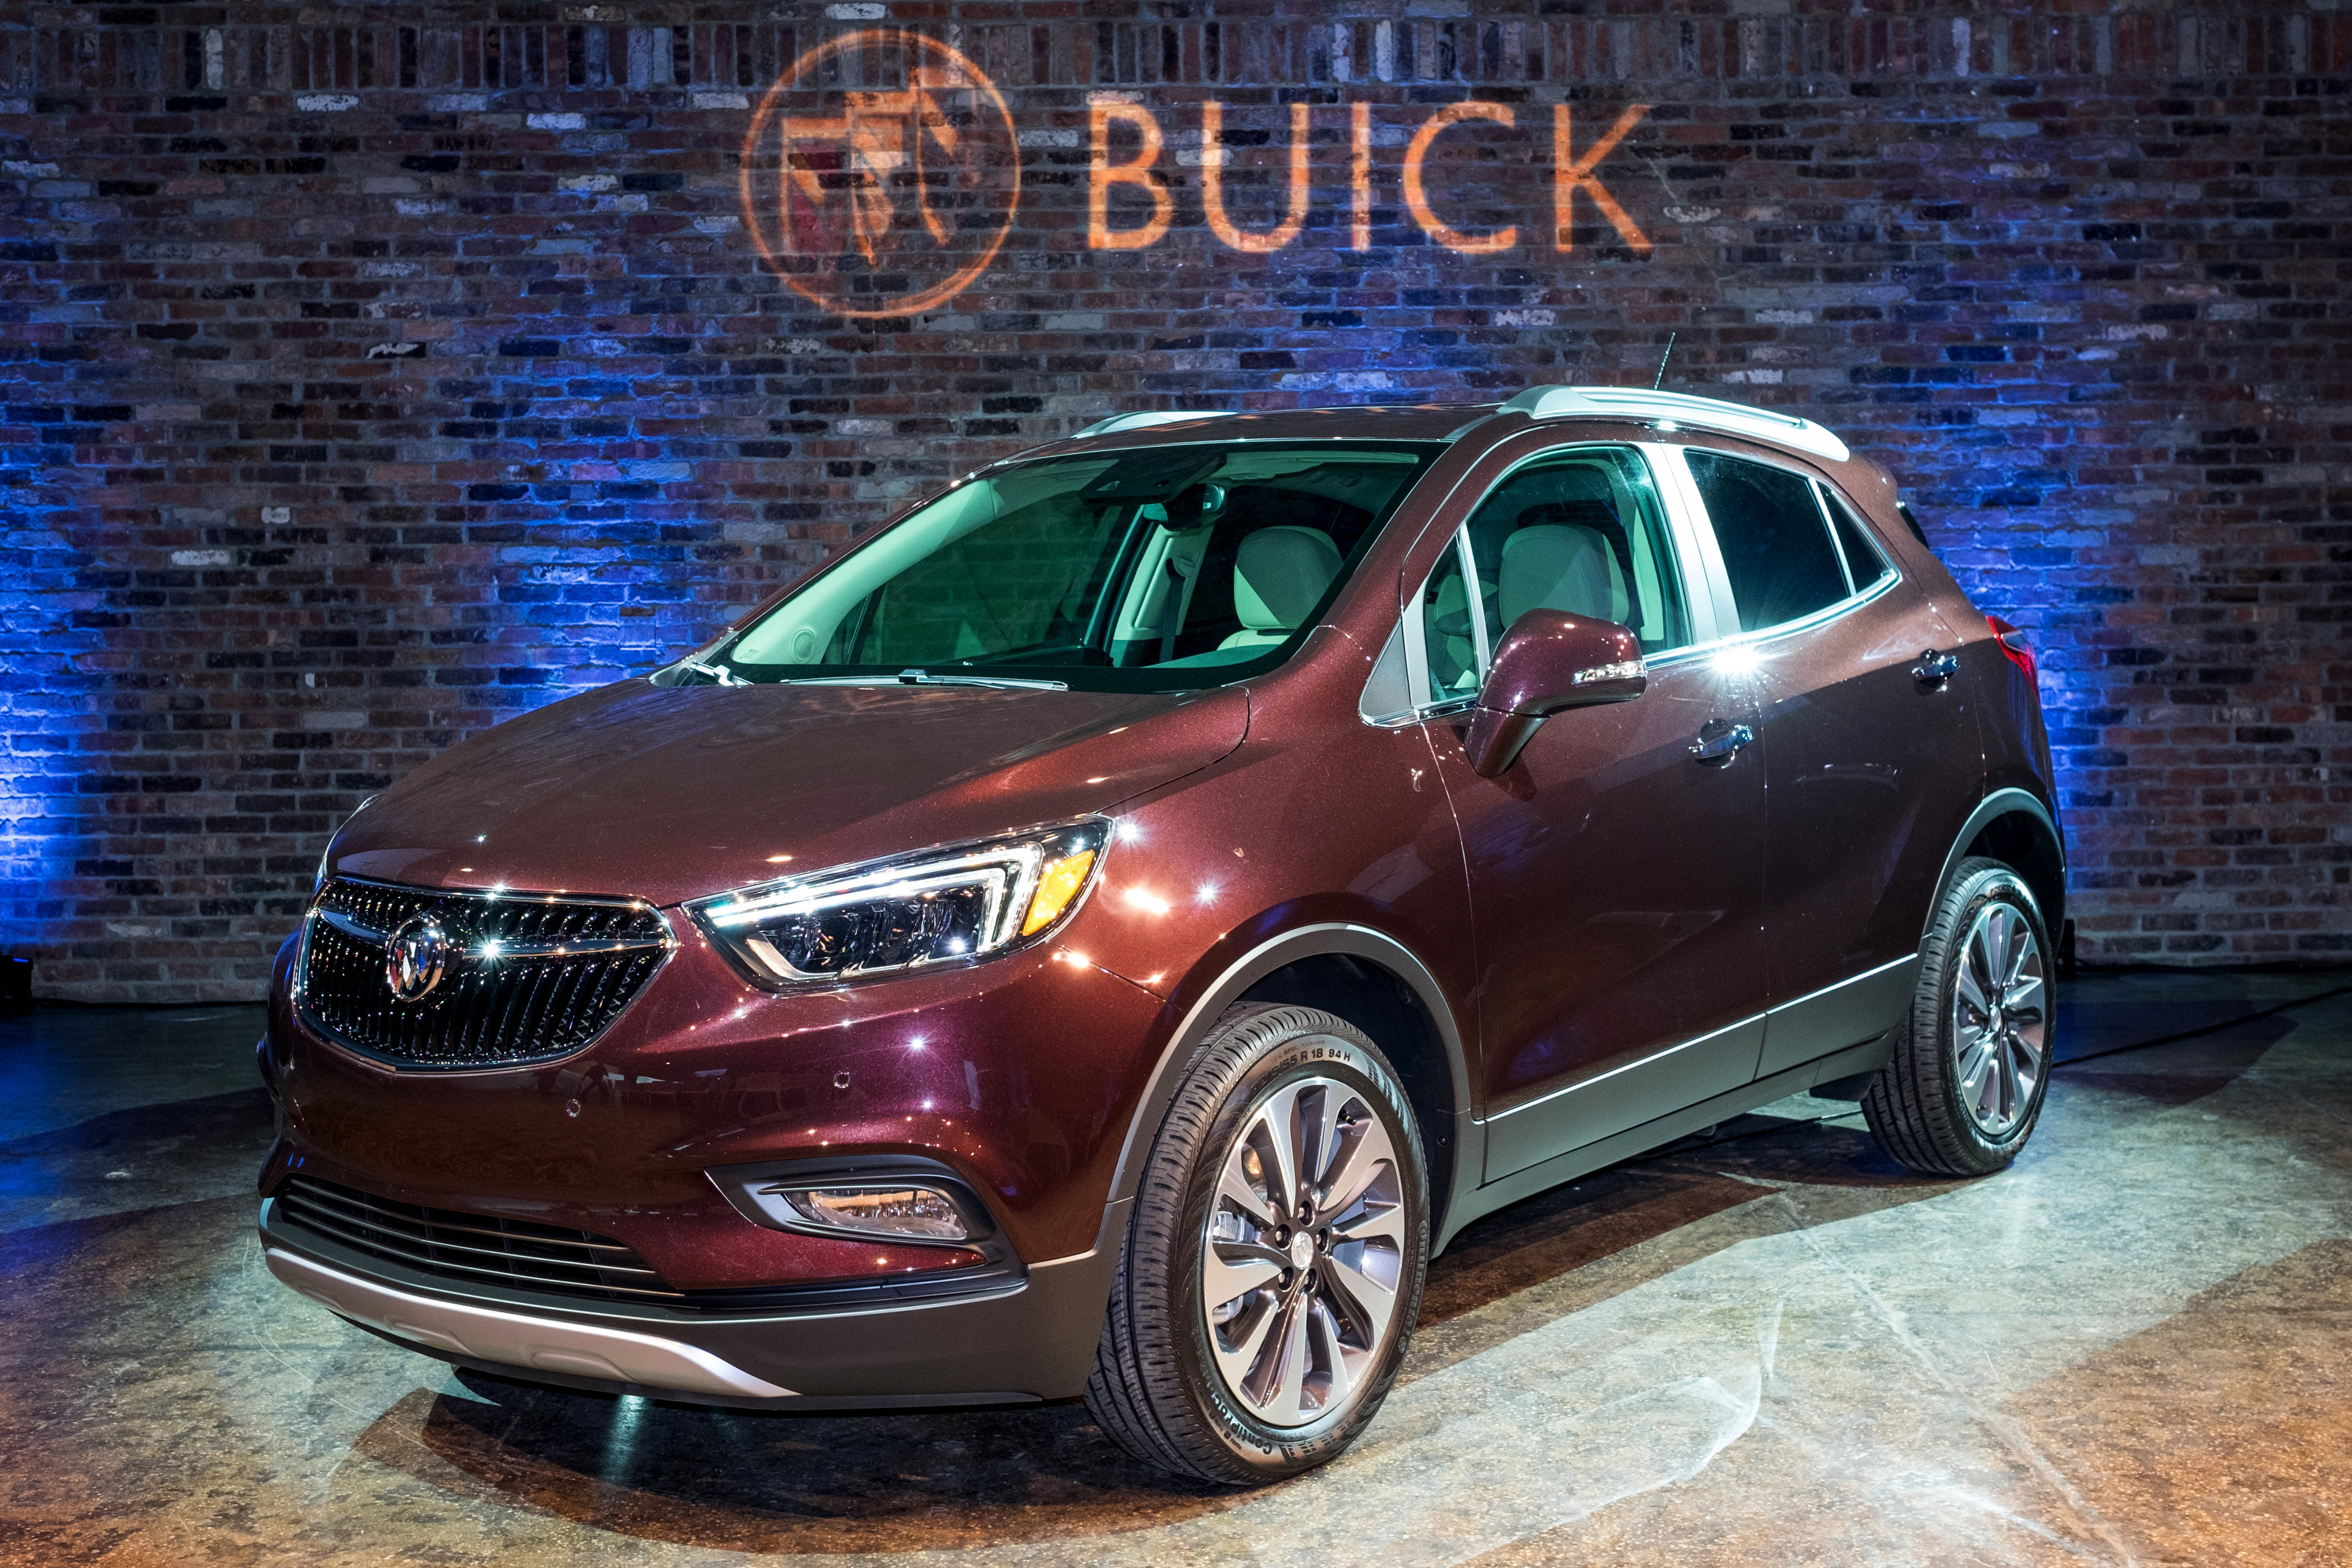 Buick Buick Pressroom - United States - Images